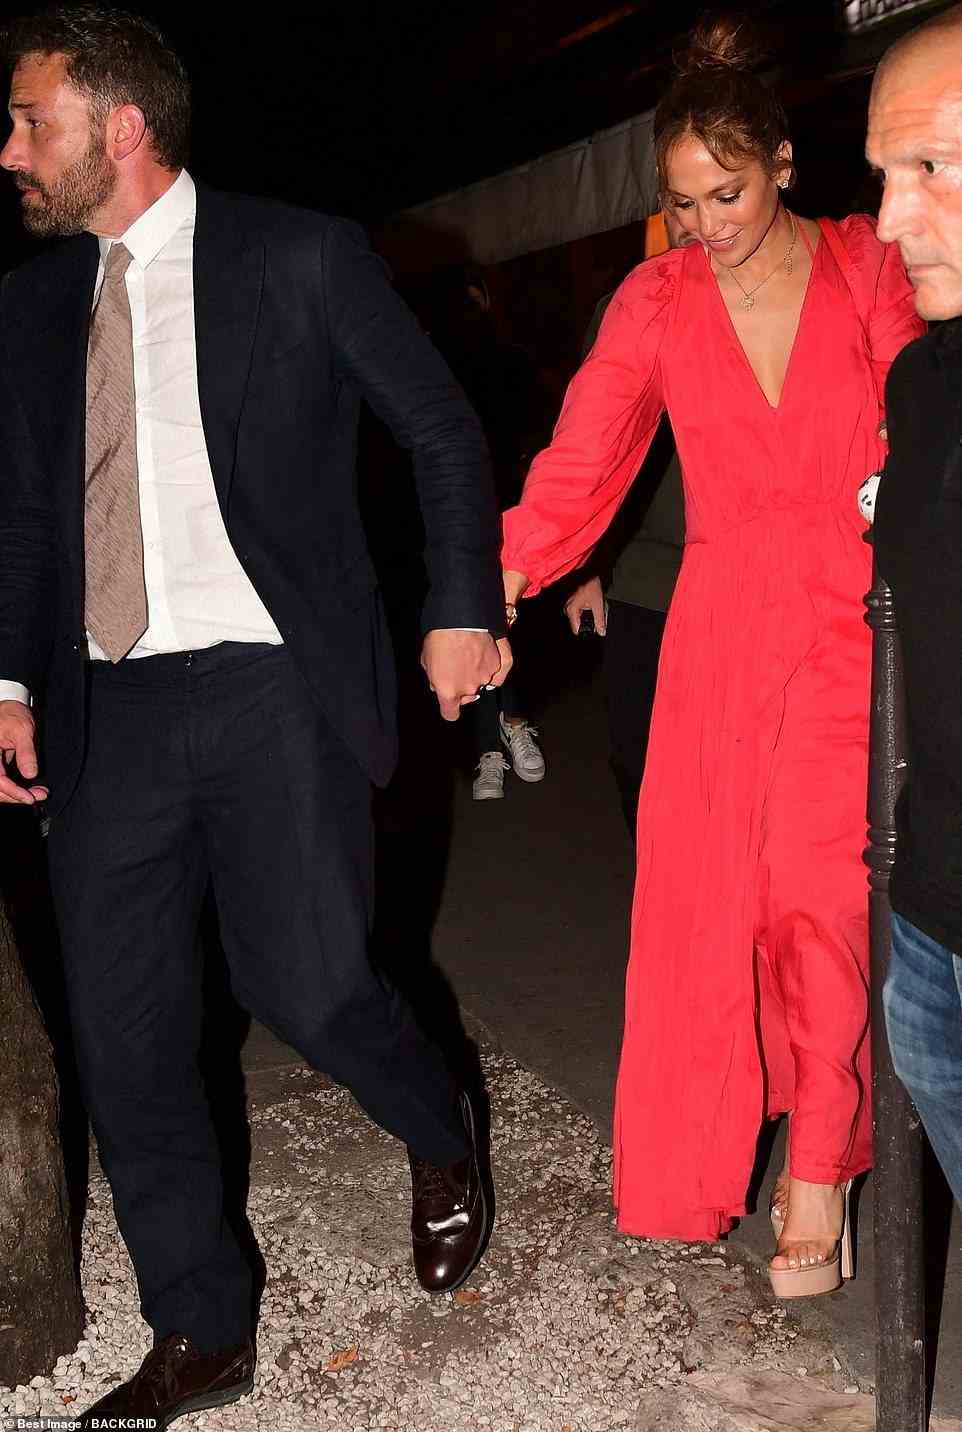 On July 21, the first day of their honeymoon, the actress donned a Forte Forte red dress, which retails for $775. She paired the look with nude Andrea Wazen Antingone PVC platform heels, which cost $620